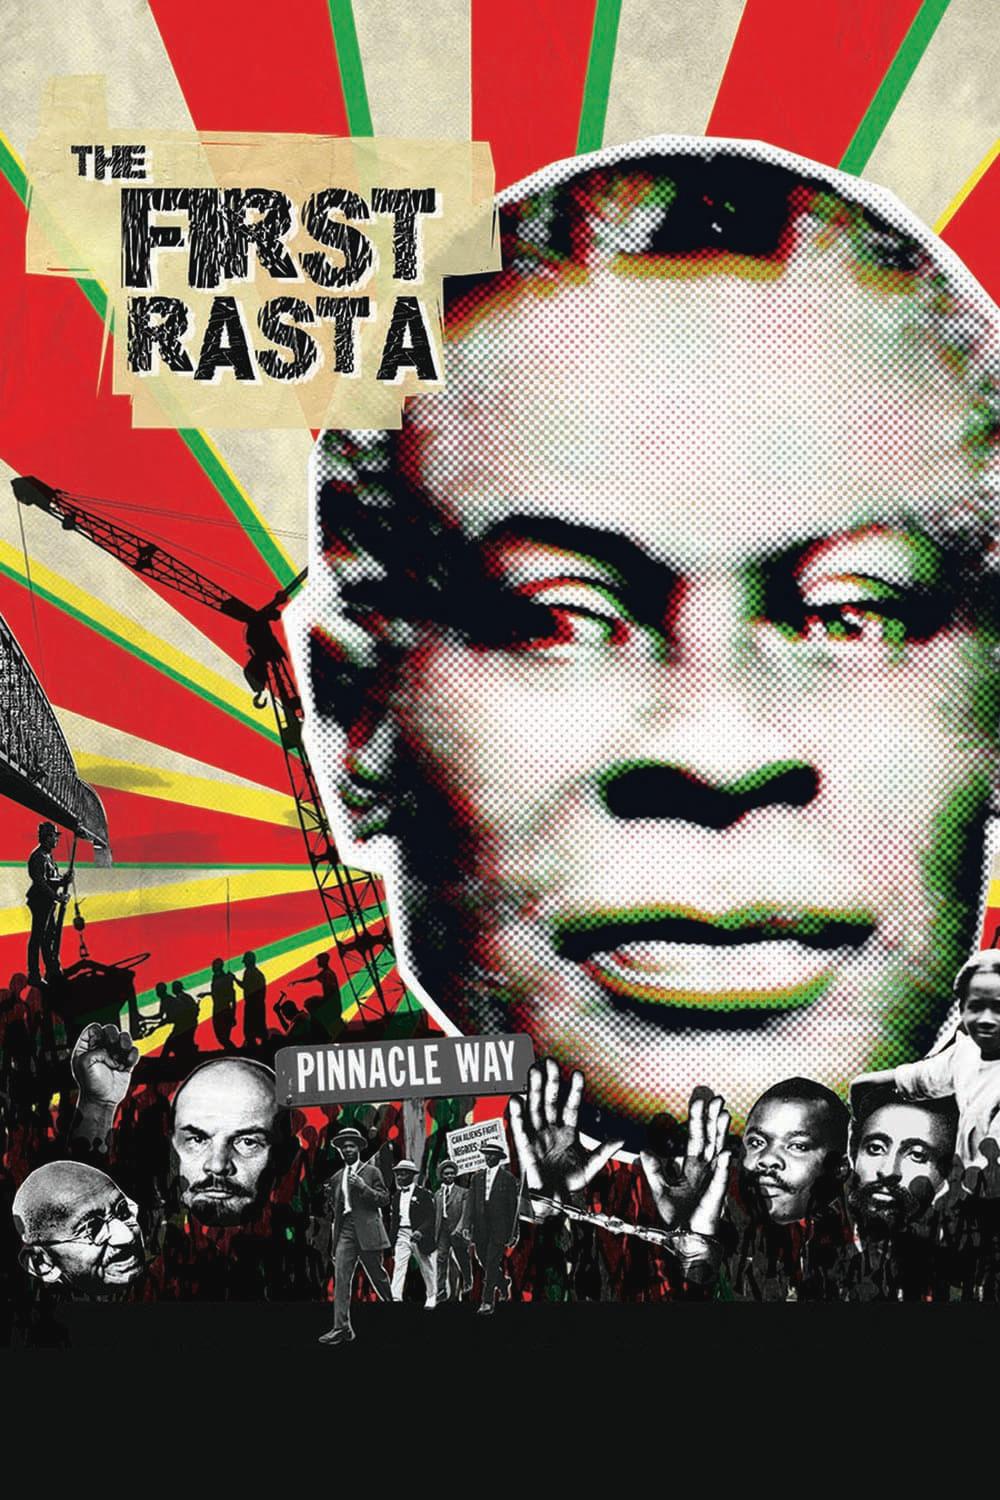 The First Rasta poster